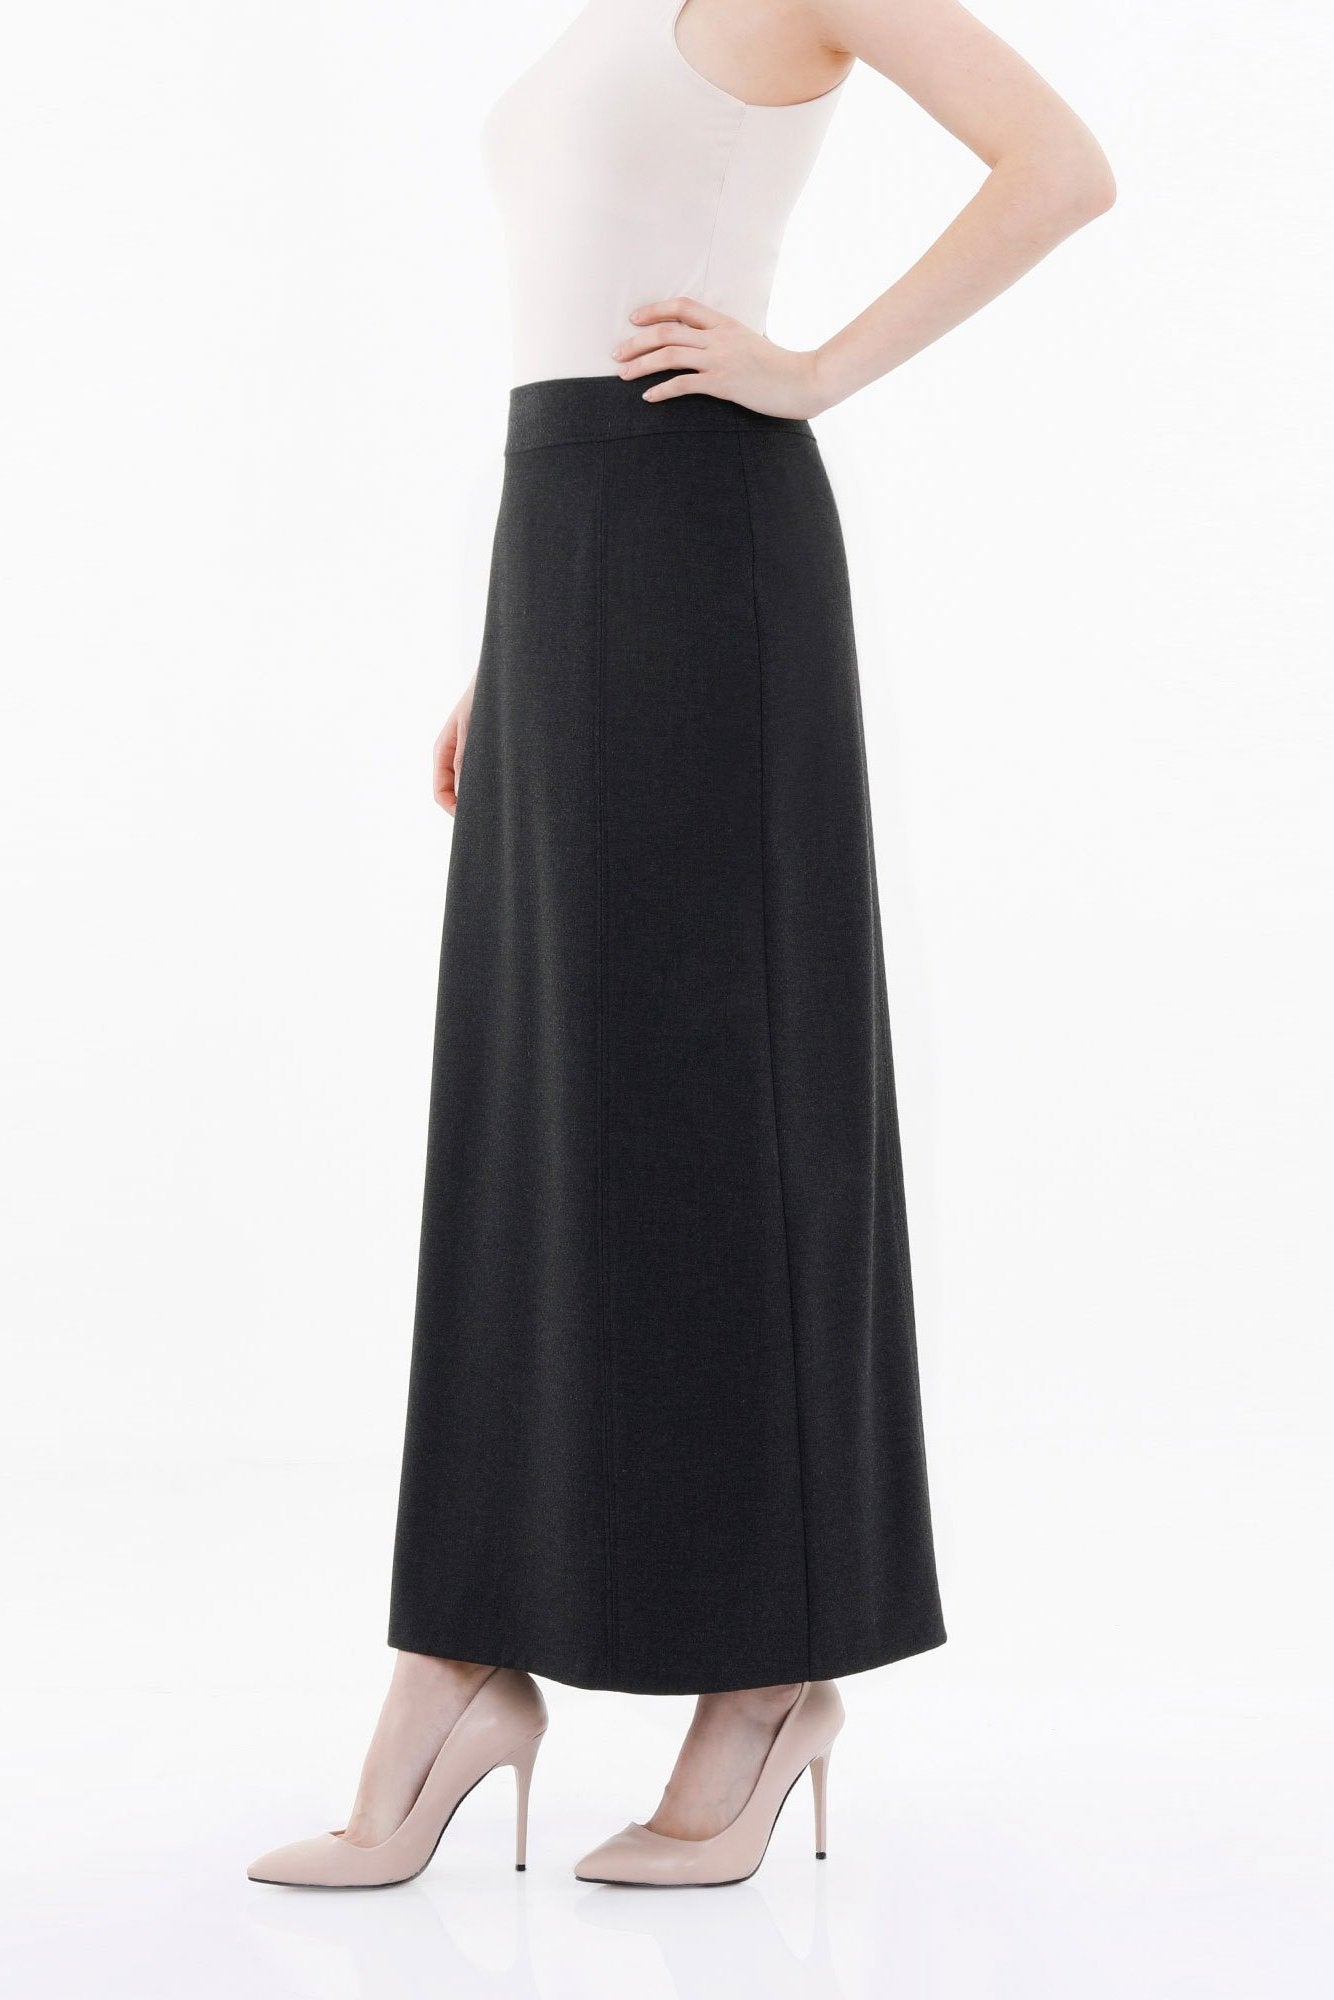 Charcoal Solid Fabric Flat Front Modest Maxi Skirt G-Line